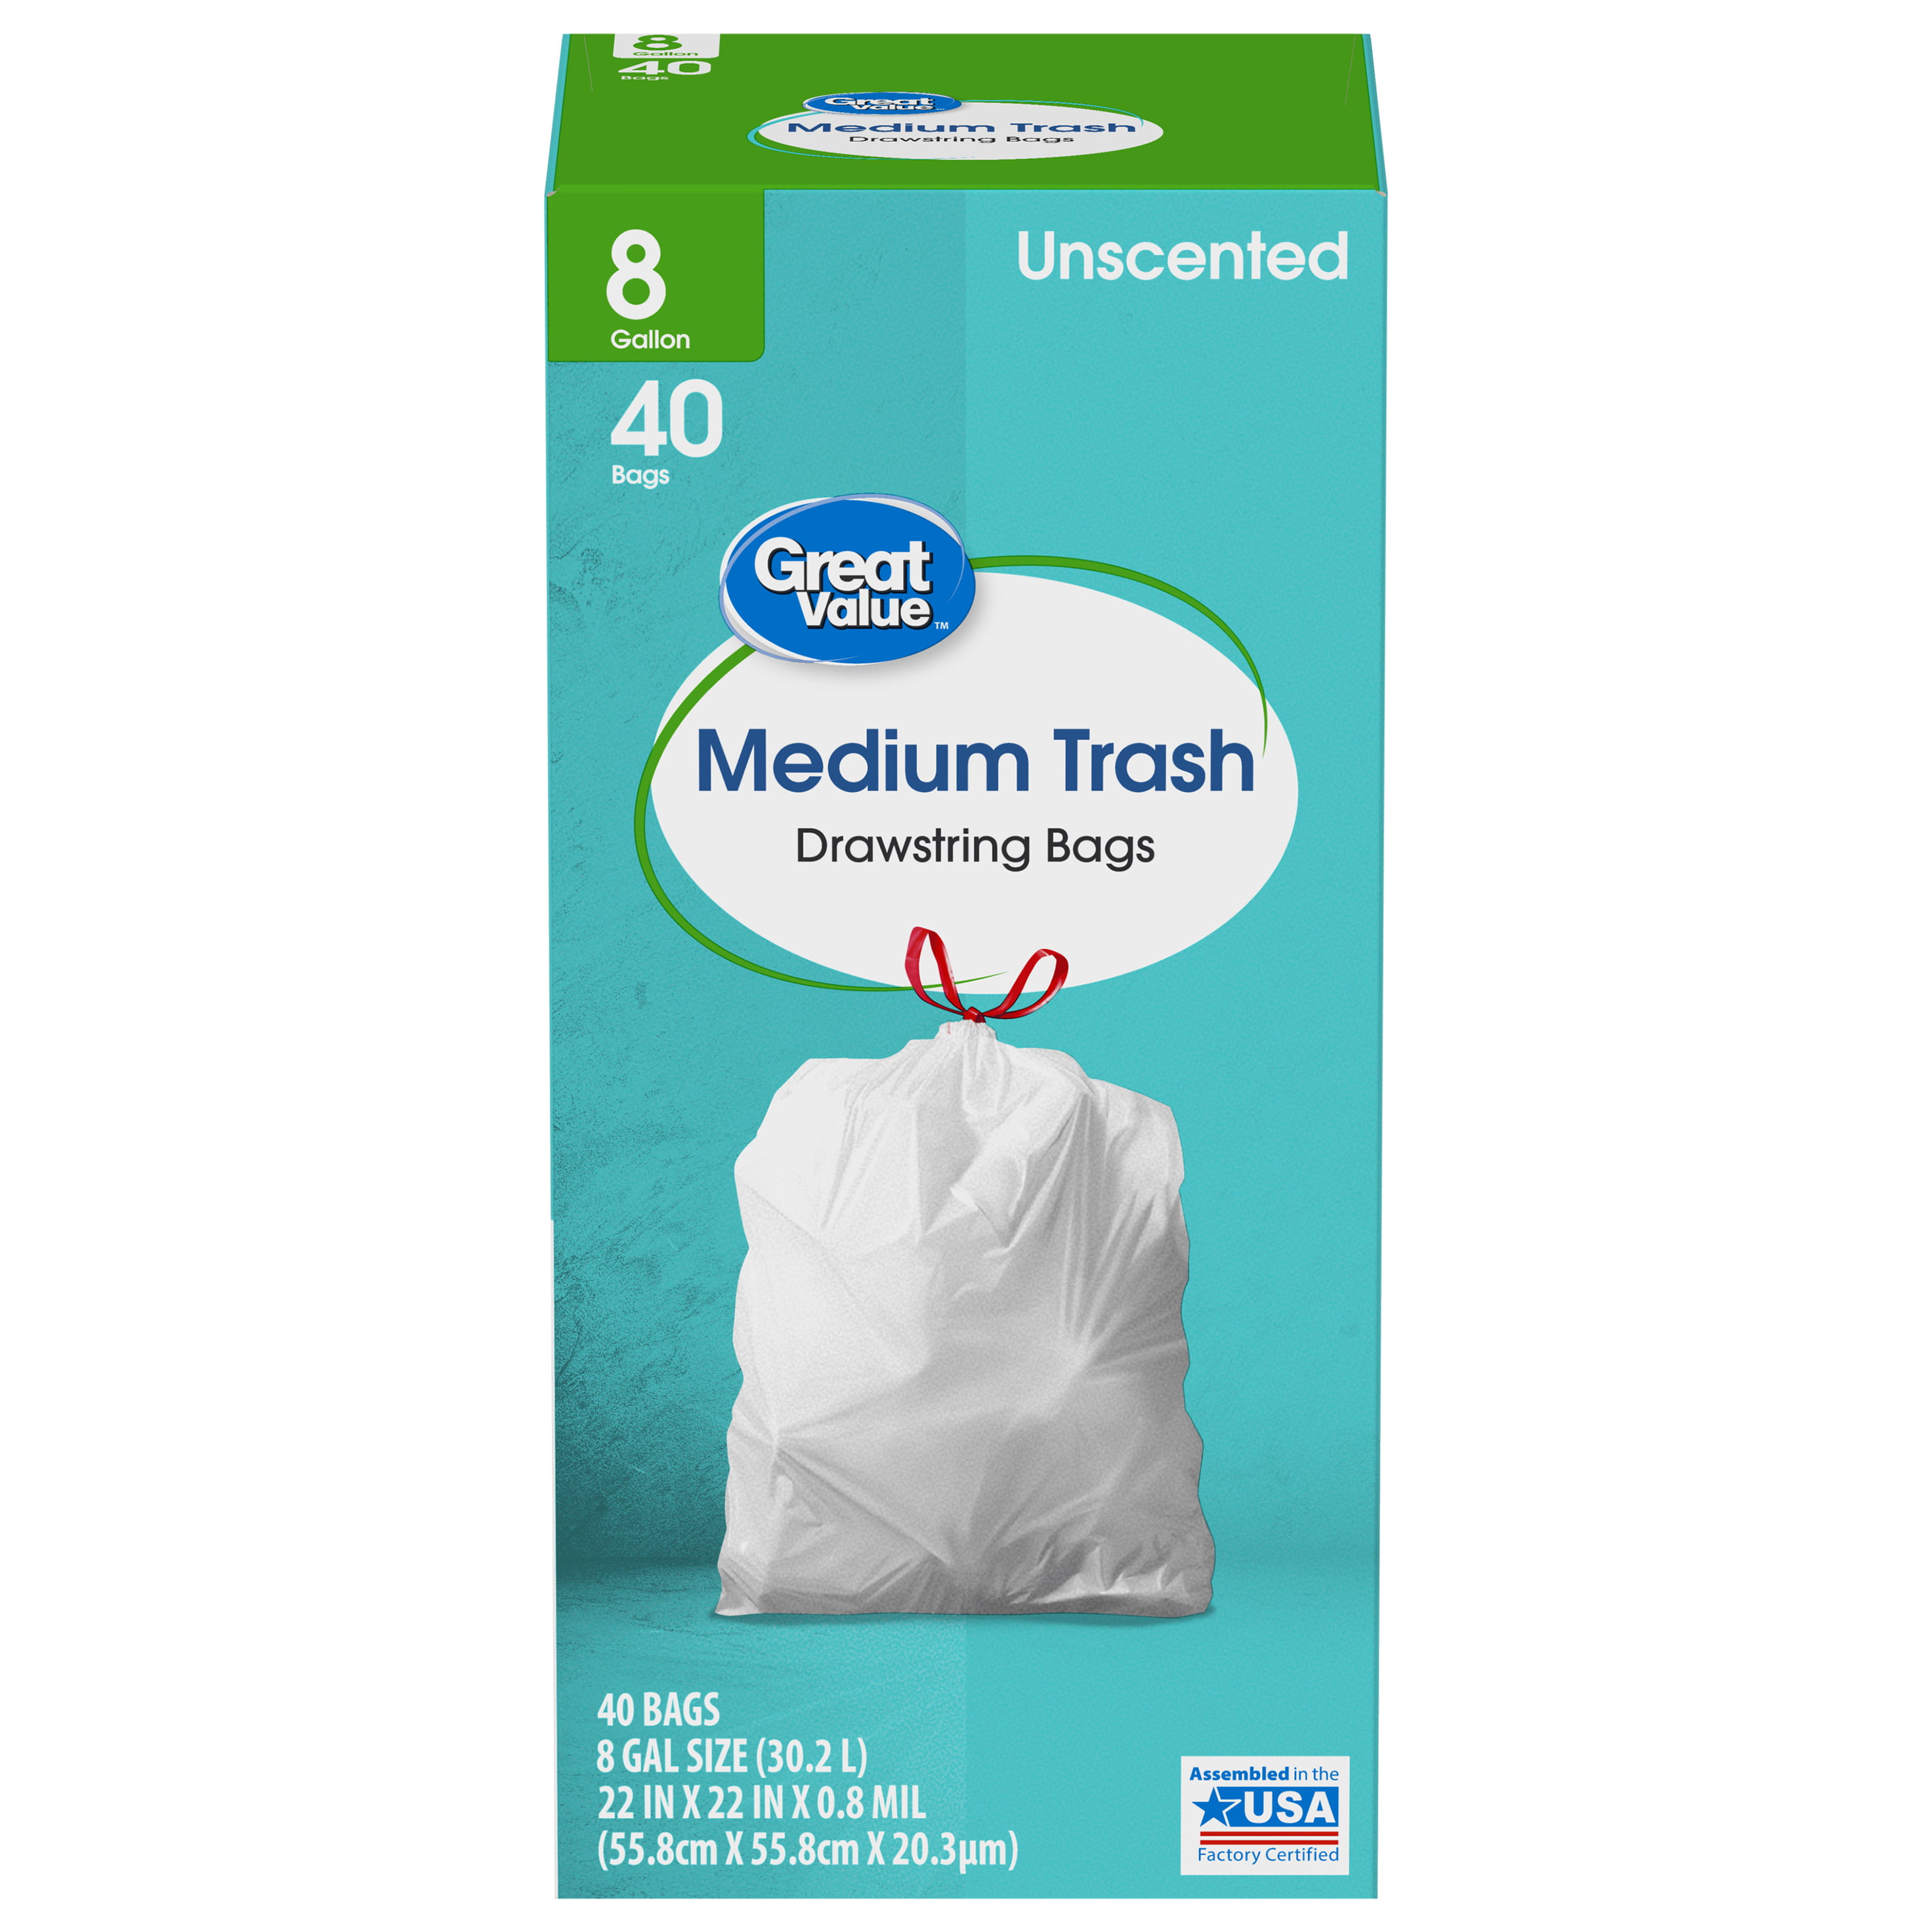 White FORID Medium Kitchen Trash Bags 8 Gallon Garbage Bags Drawstring 120 Counts Unscented 30 Liter Disposable Plastic Waste Can Liners for Bathroom Bedroom Office Home